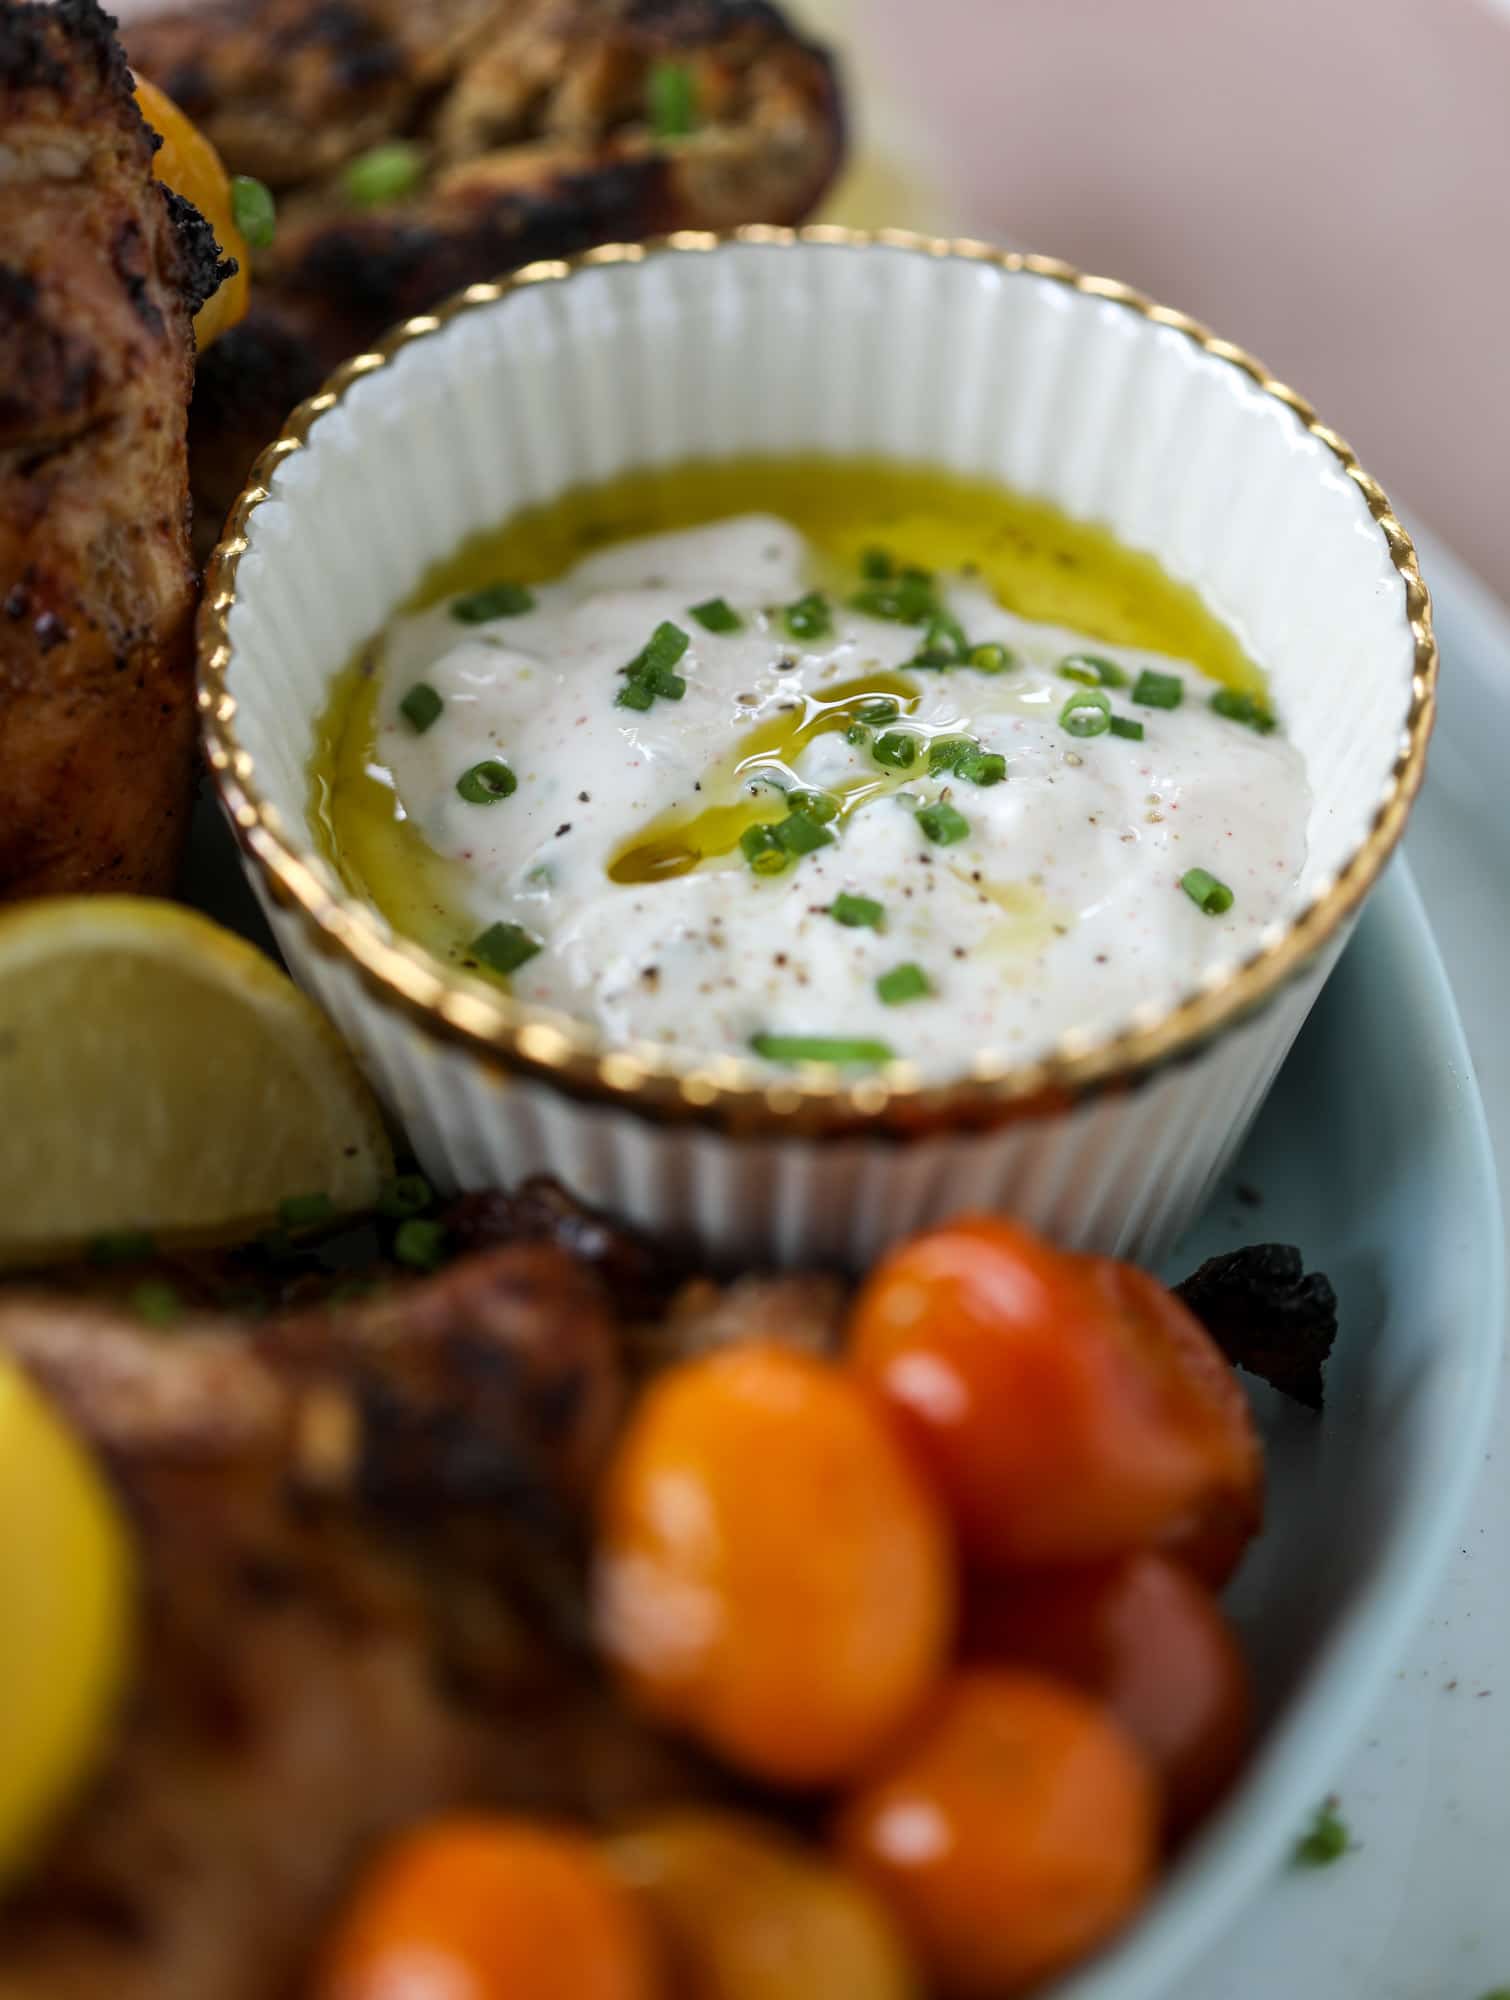 This yogurt marinated chicken recipe is super flavorful, tender, juicy and delicious. The fresh lemon adds a kick of flavor and it's a versatile recipe you can make for lunch or dinner. Grill it and serve with your favorite side, then use the leftovers for lunch! I howsweeteats.com #yogurt #chicken #lemon #grilled #healthy #recipes